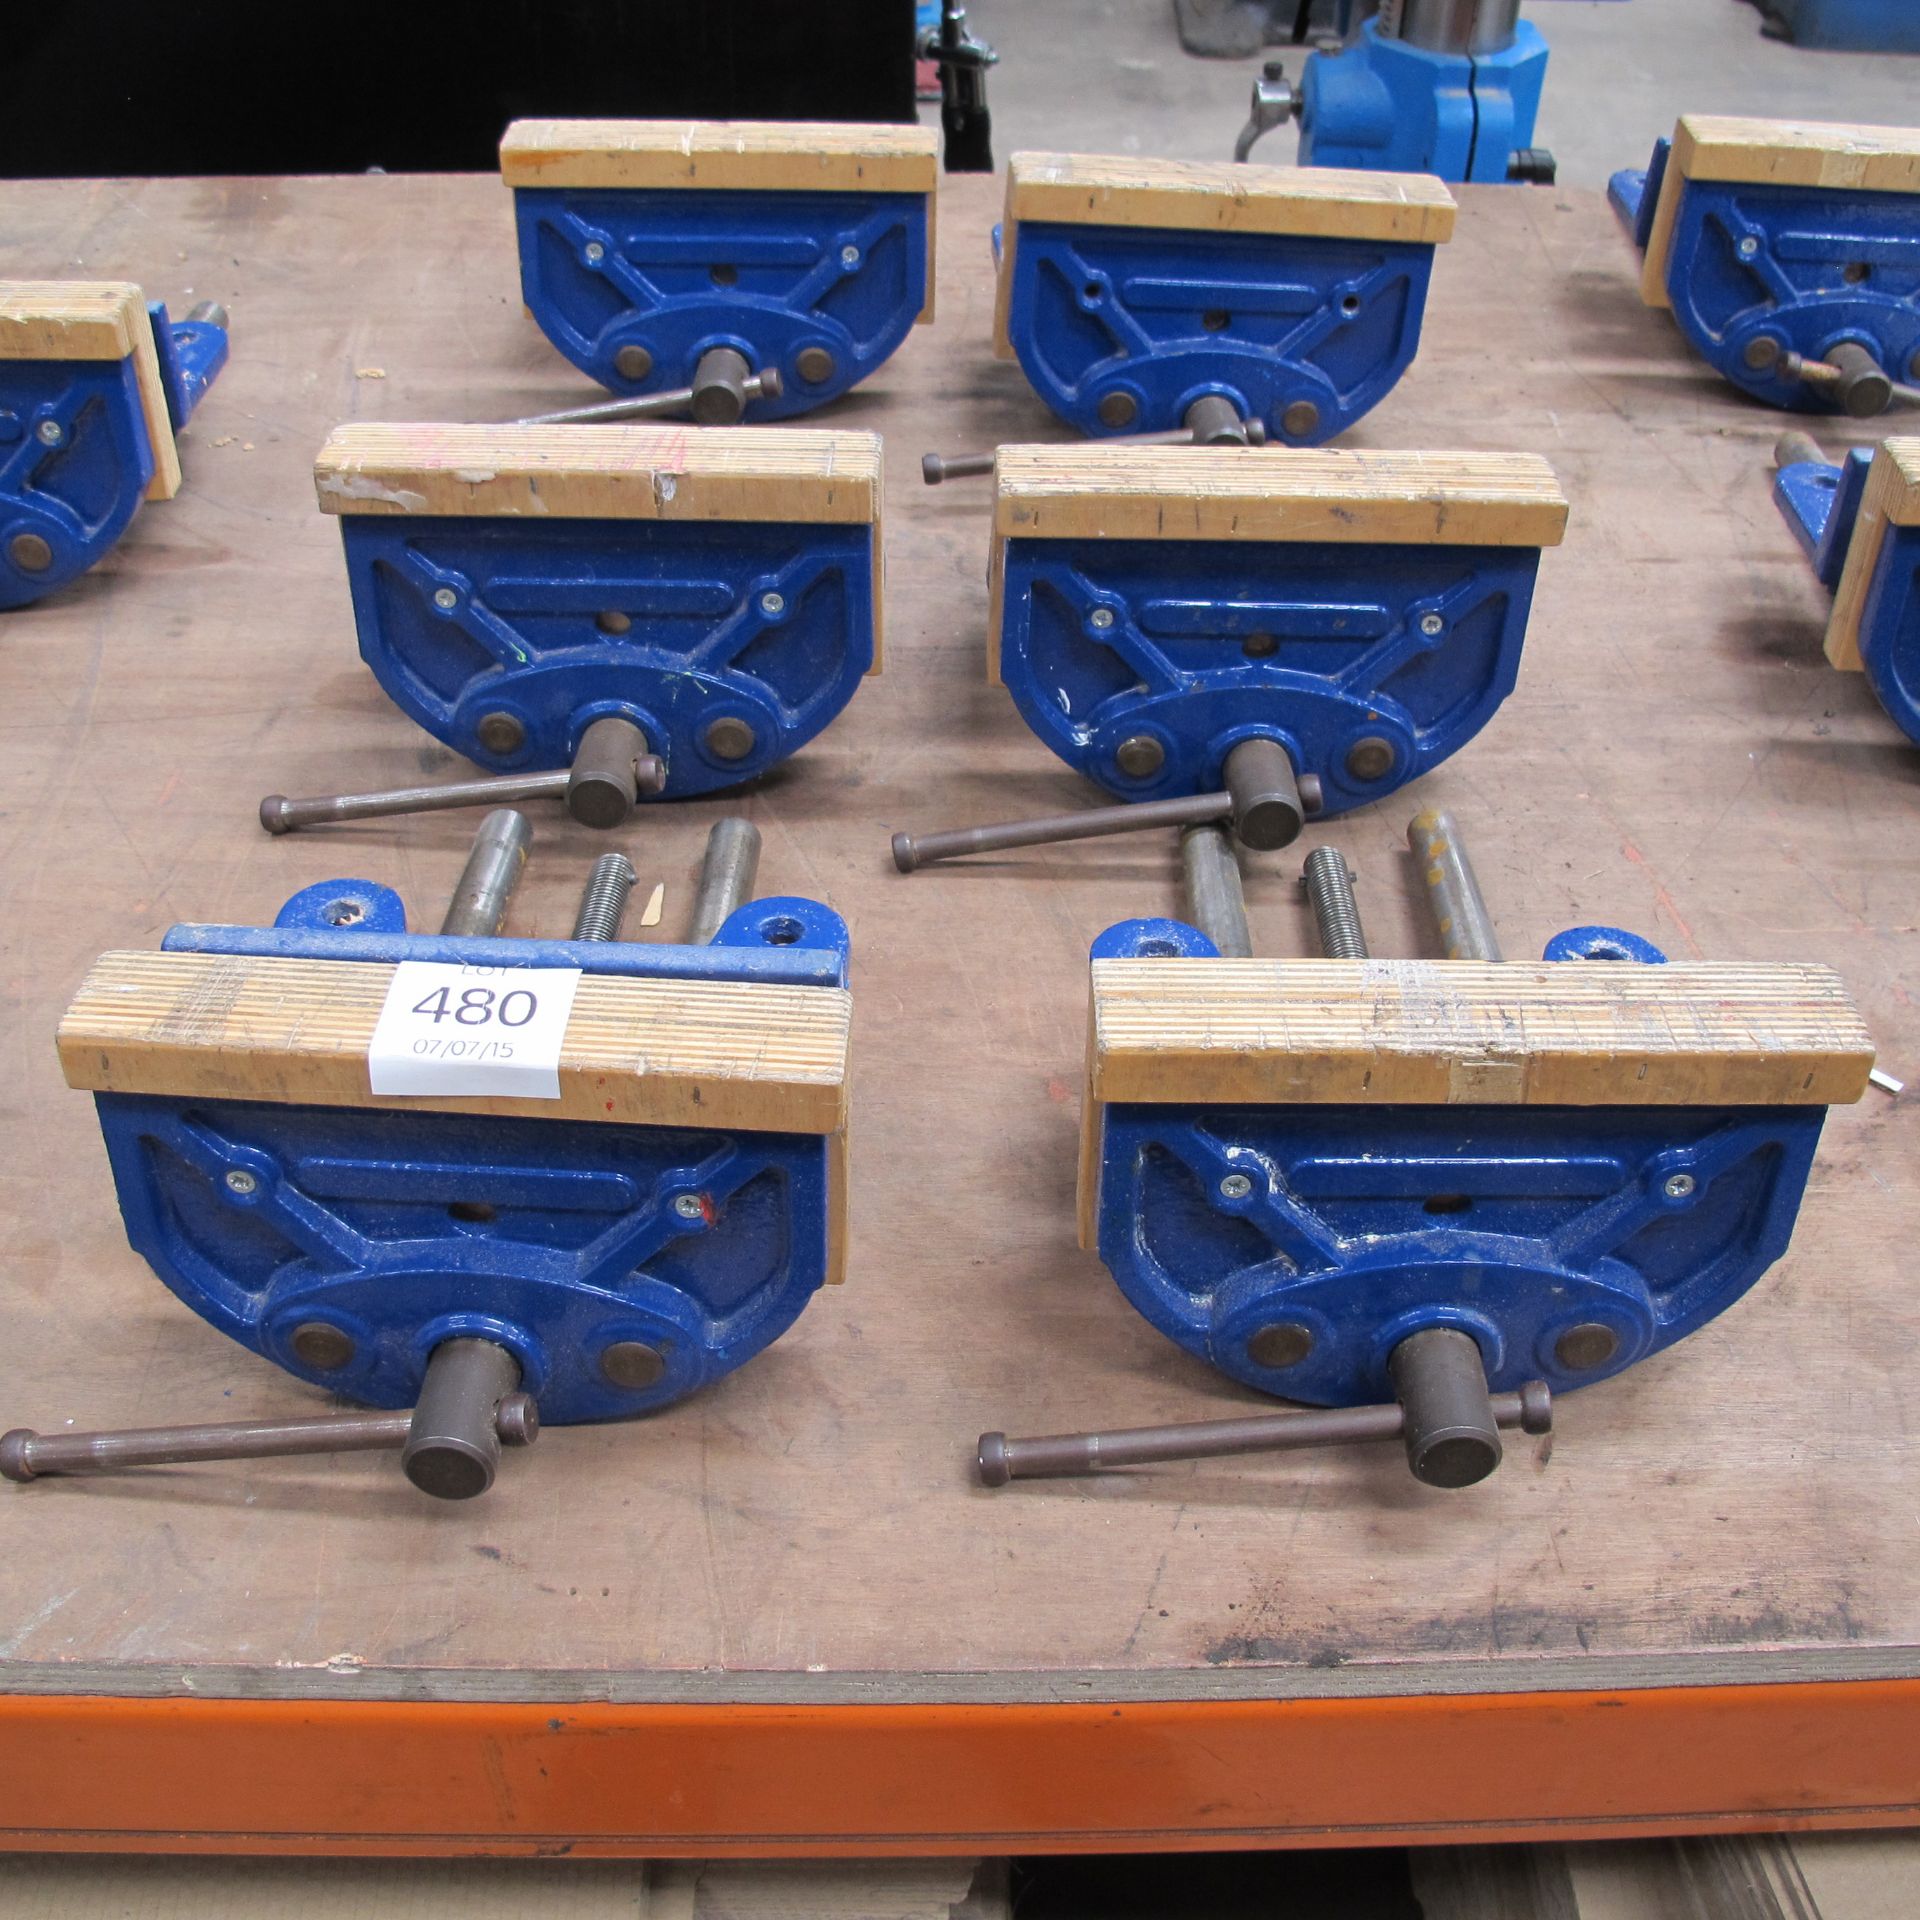 * 6 x Woodworking bench vices